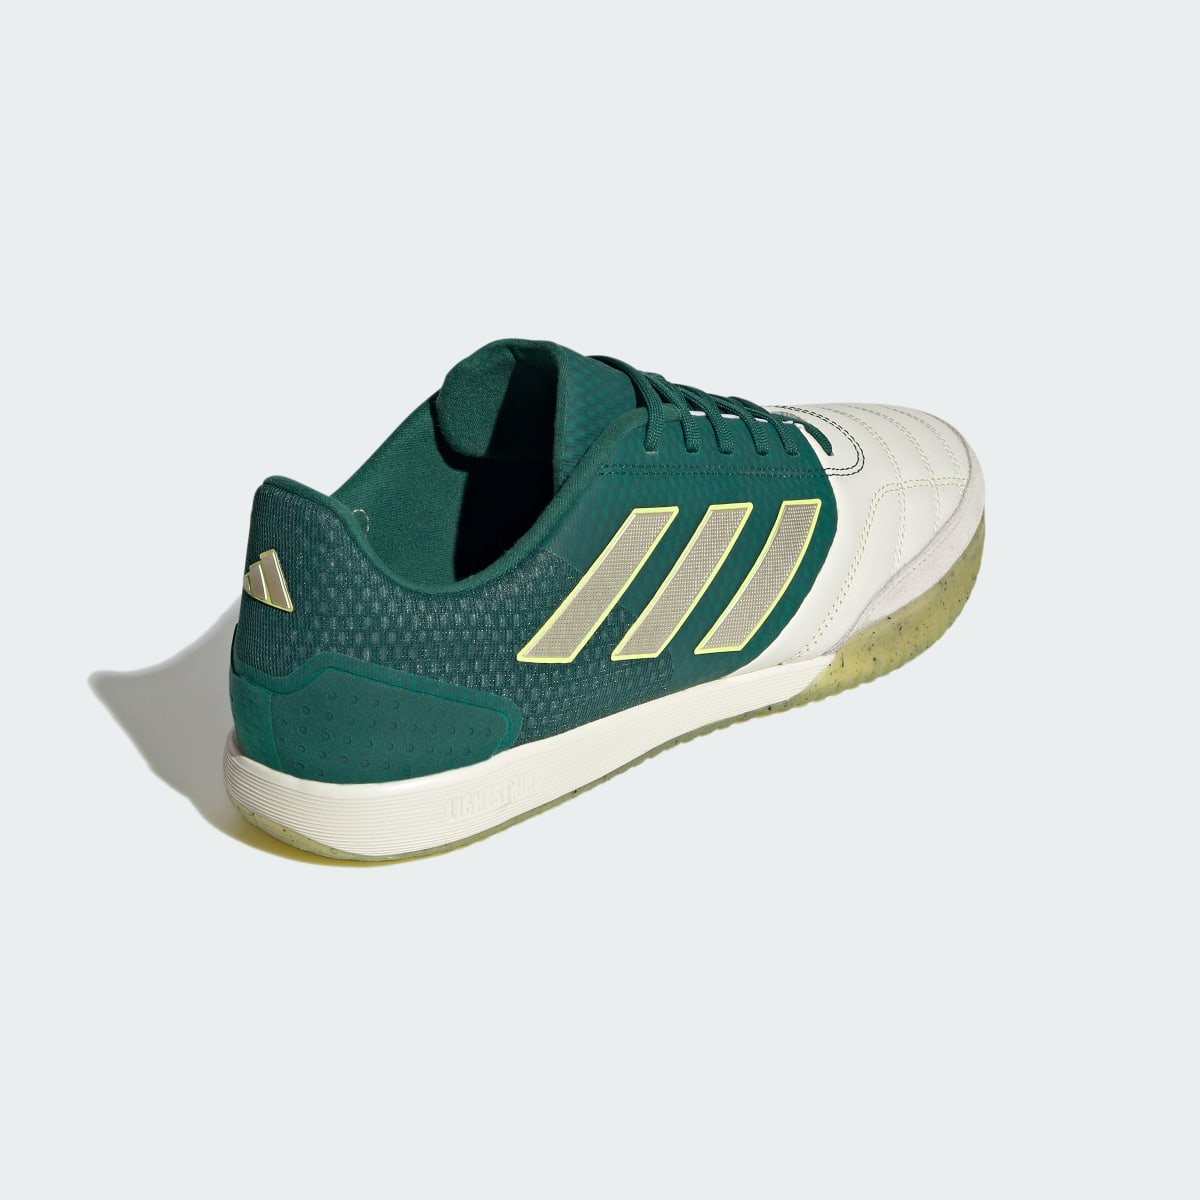 Adidas Top Sala Competition Indoor Boots. 6